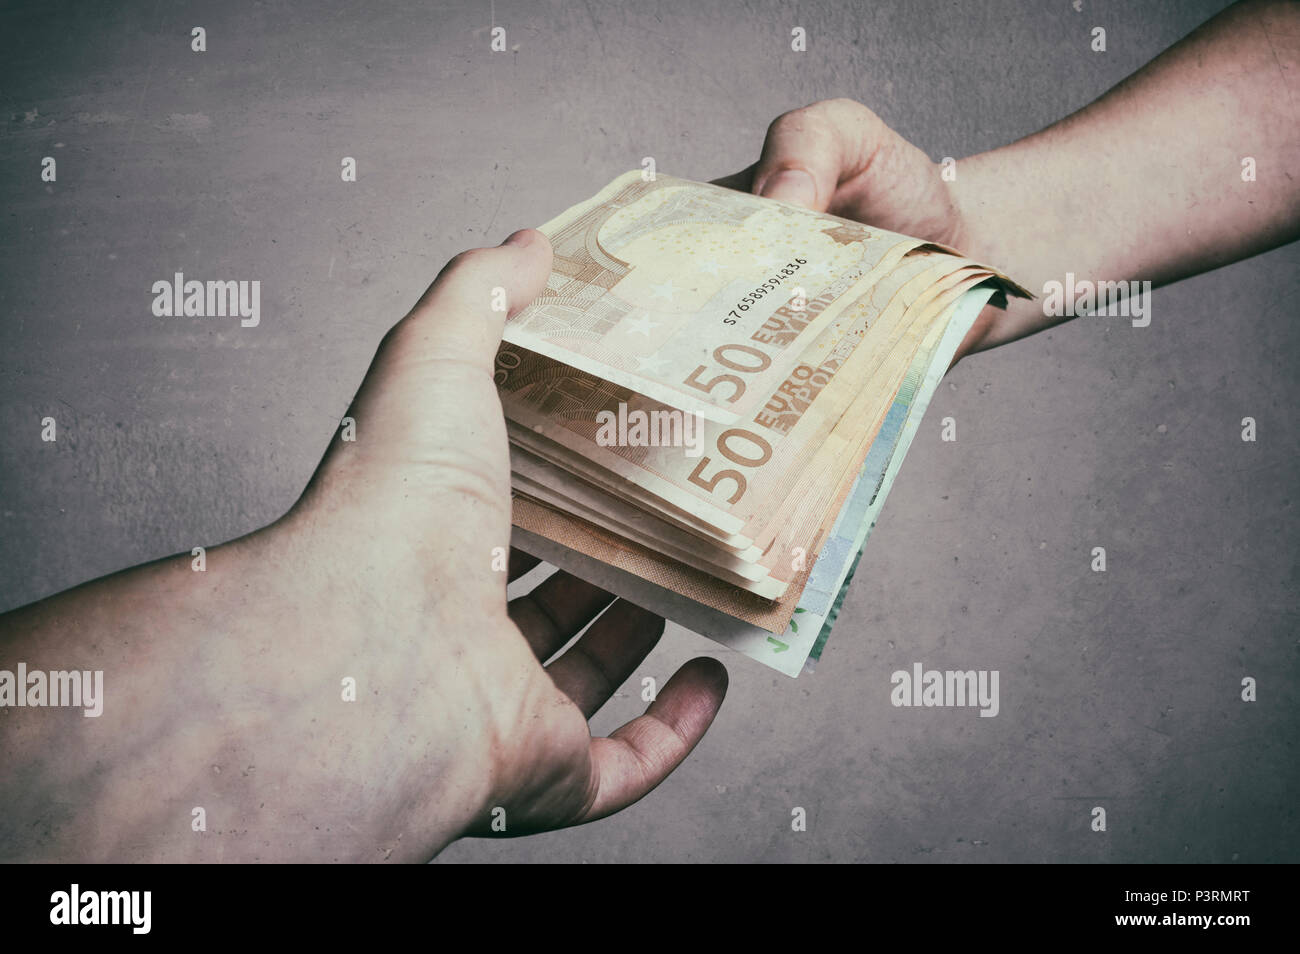 Money Loan. Bank officer loaning stack of euro banknotes money,  loan, bribery and corruption concepts Stock Photo